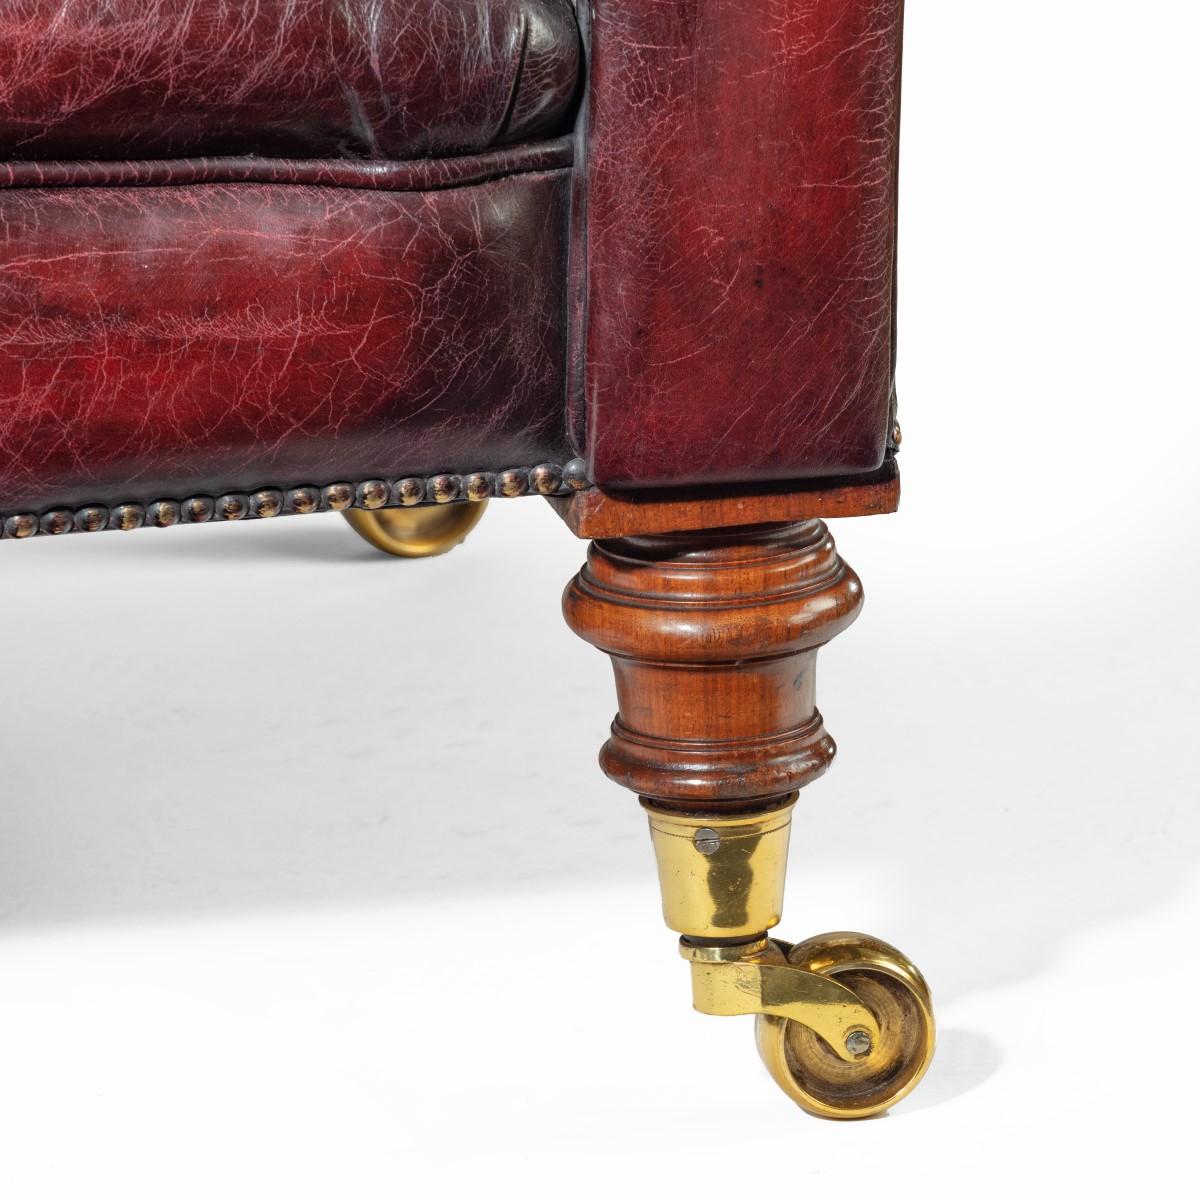 A Victorian deep buttoned Chesterfield settee, with an upright back and scroll arms, set on four turned walnut legs with brass castors, reupholstered in distressed burgundy leather. English, circa 1850.

 